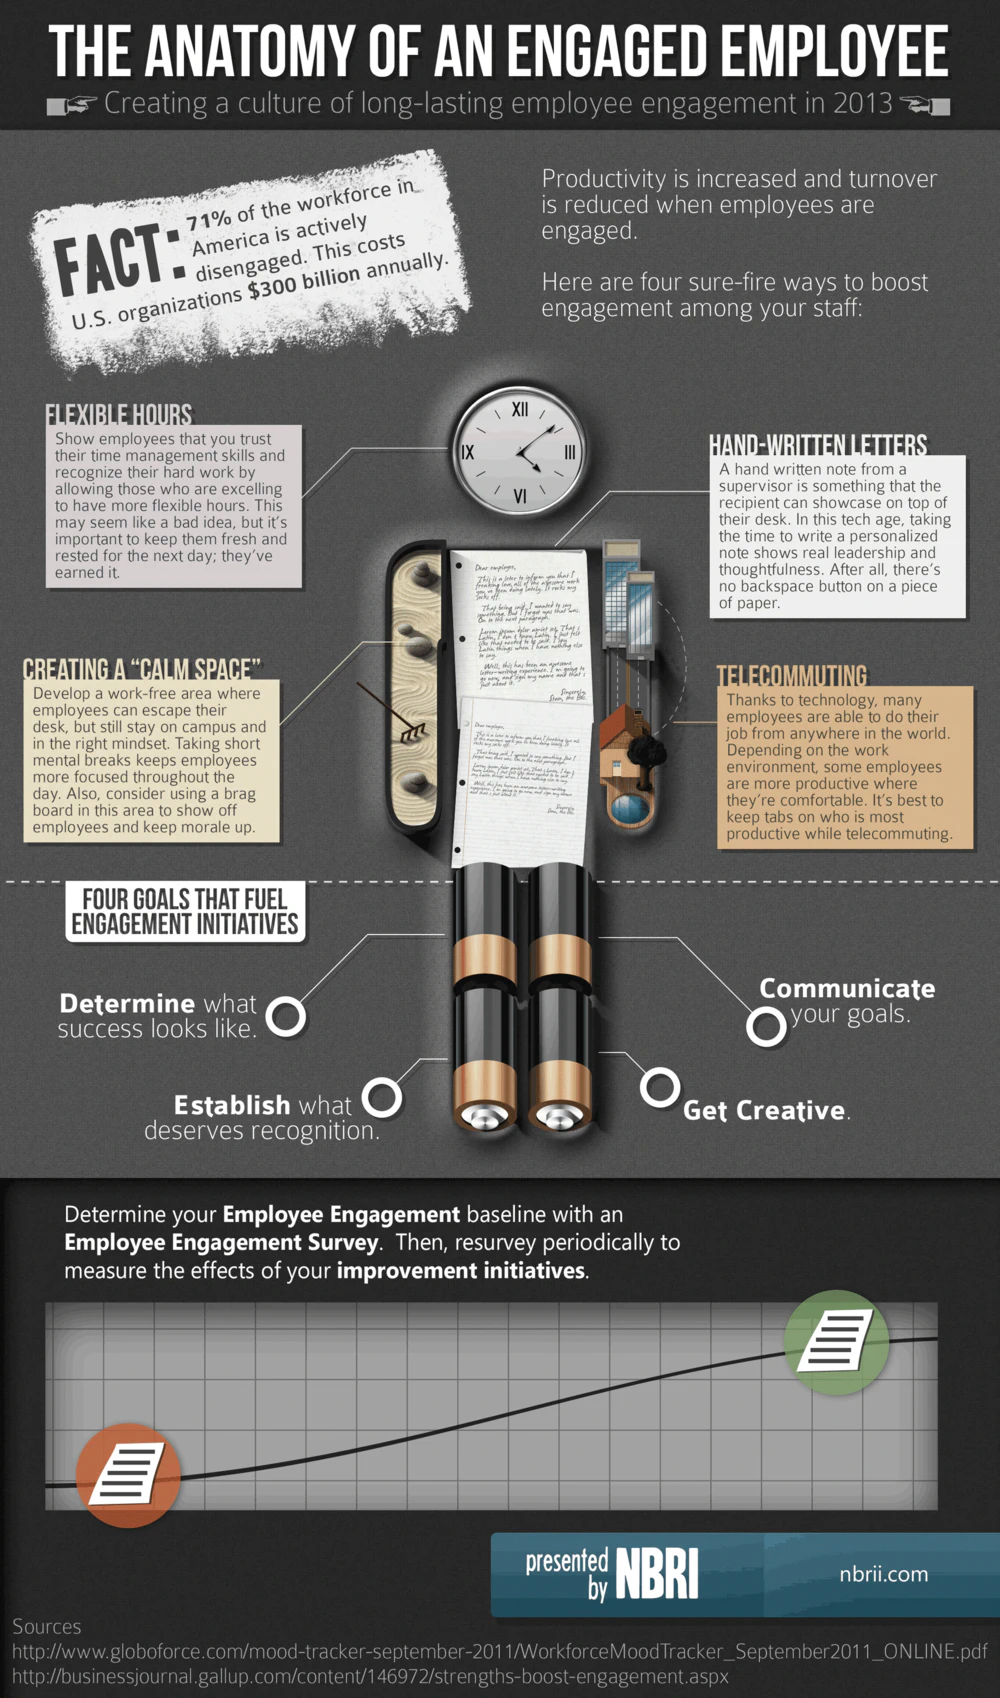 The Anatomy of an Engaged Employee infographic